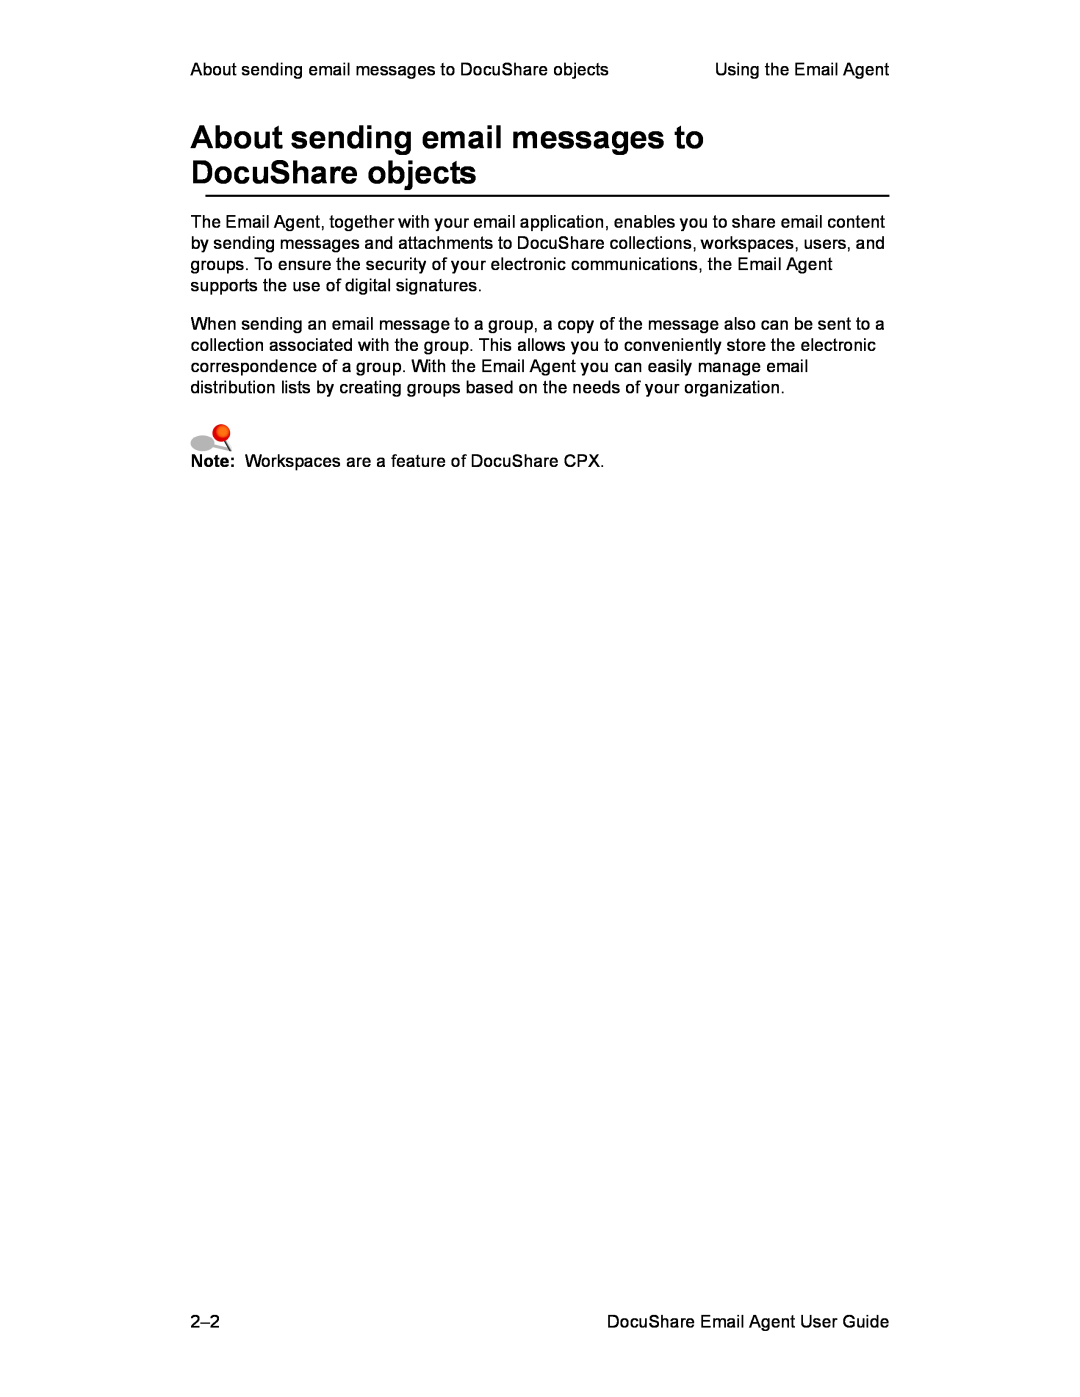 Xerox DocuShare 6.0 manual About sending email messages to DocuShare objects 